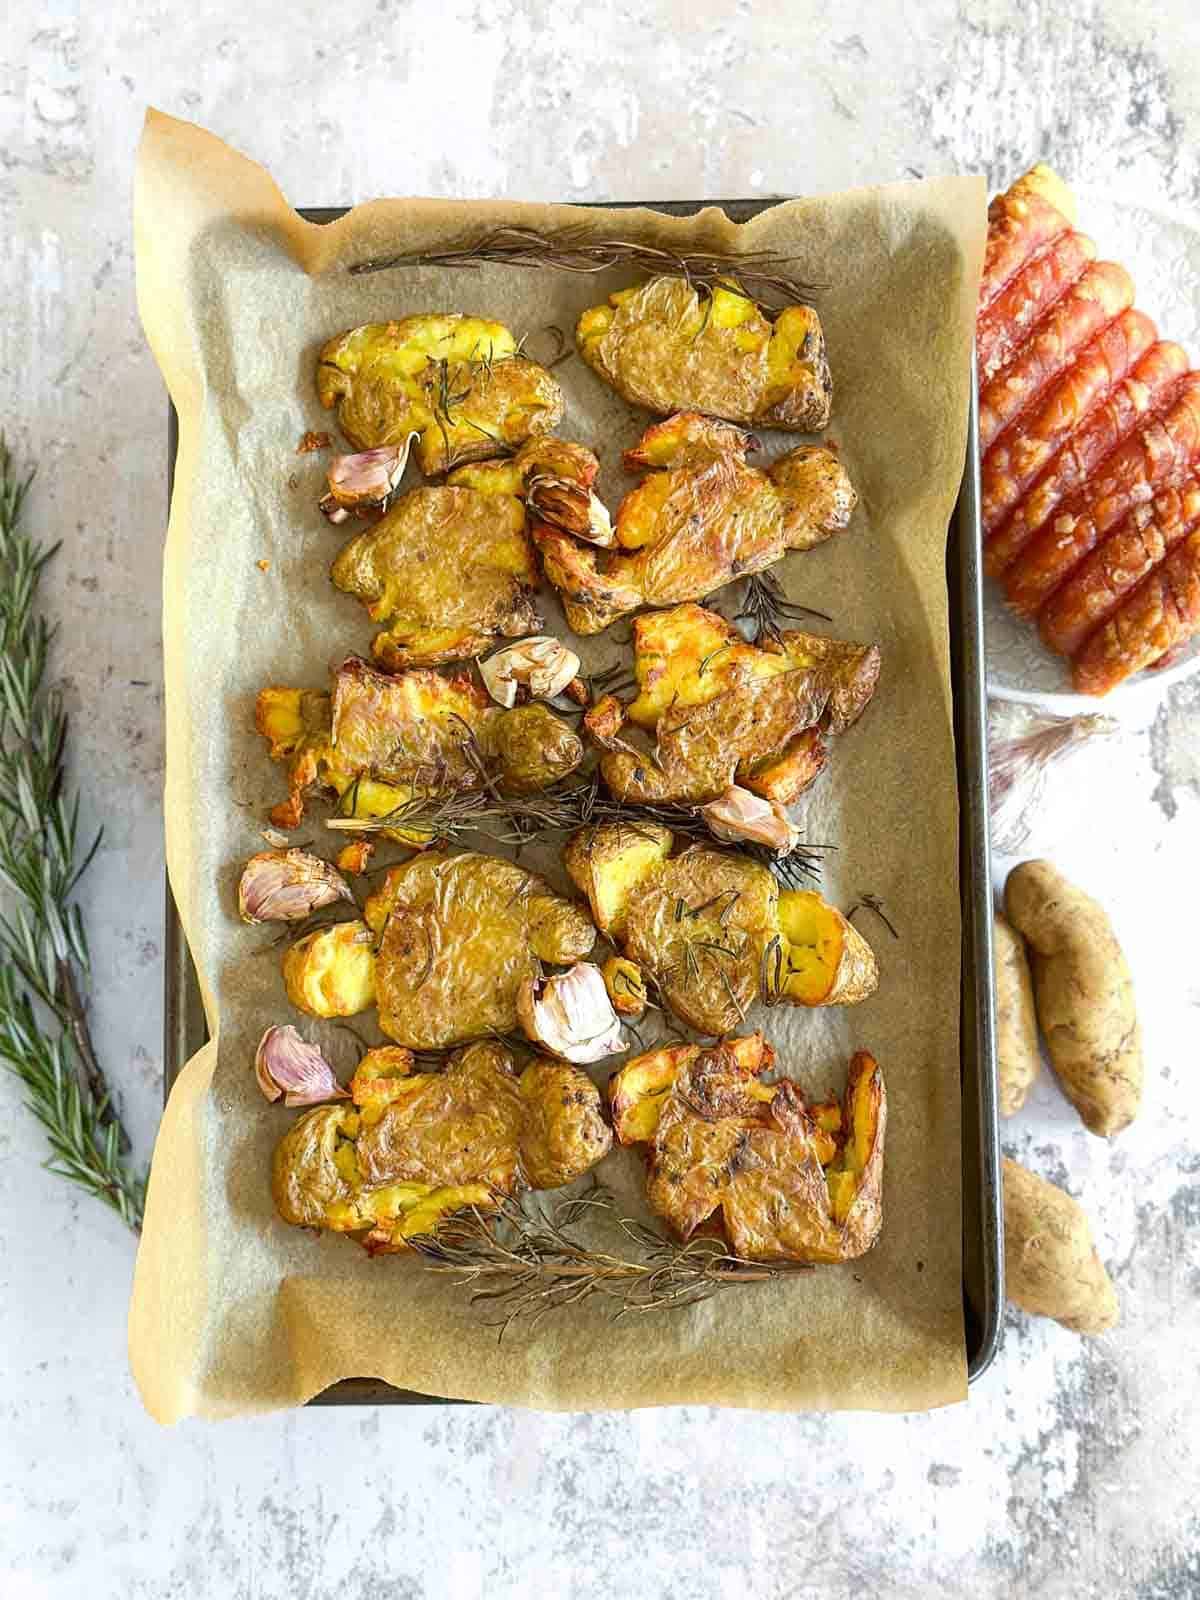 Sheet pan of smashed fingerling potatoes on parchment paper with roast pork, garlic, fresh potatoes and rosemary in the background.